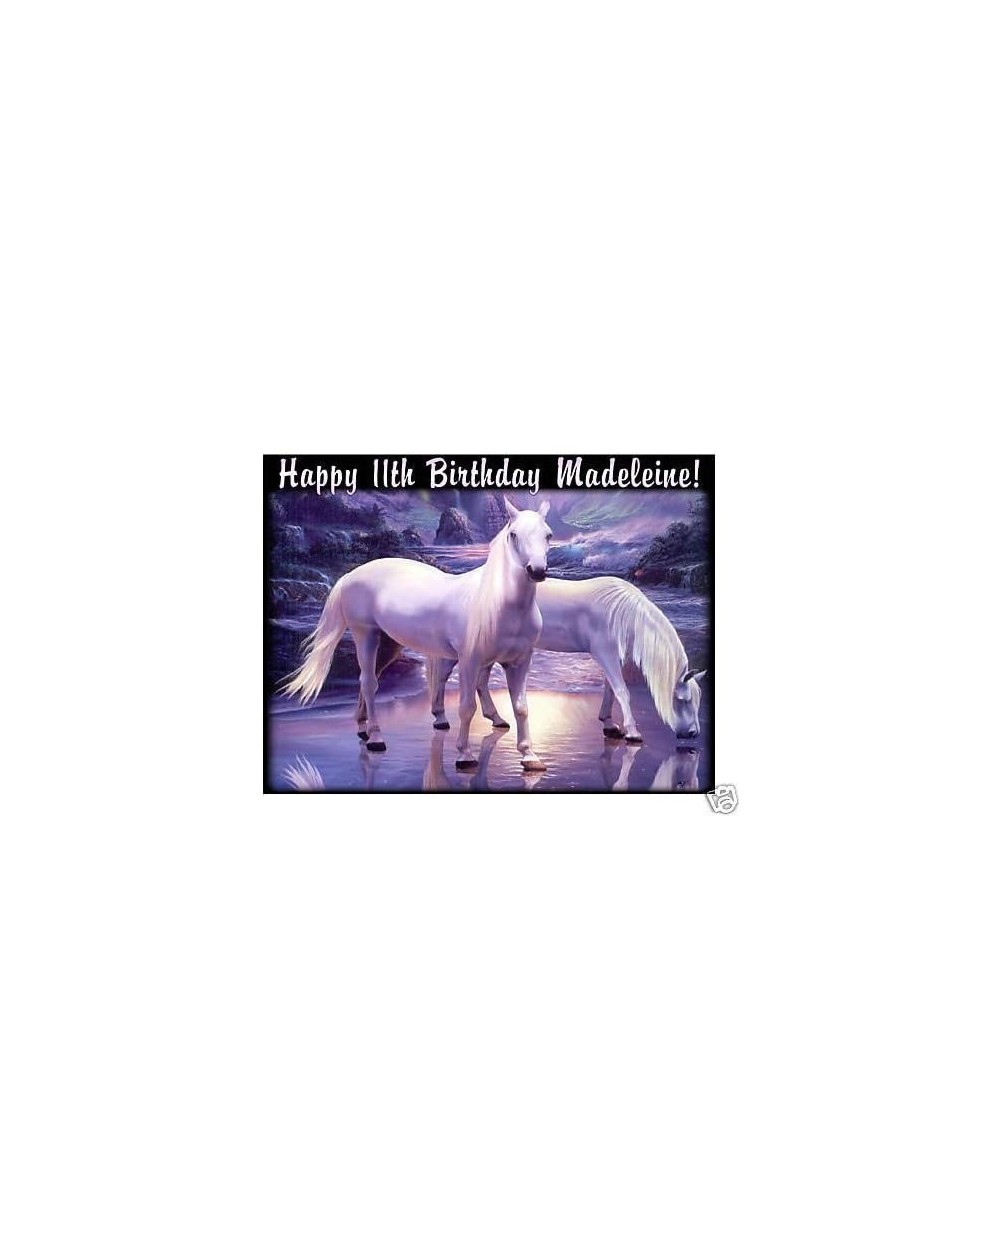 Cake & Cupcake Toppers Mystical Horses Edible Cake Image Frosting Sheet - CE12HV4CRDR $26.19